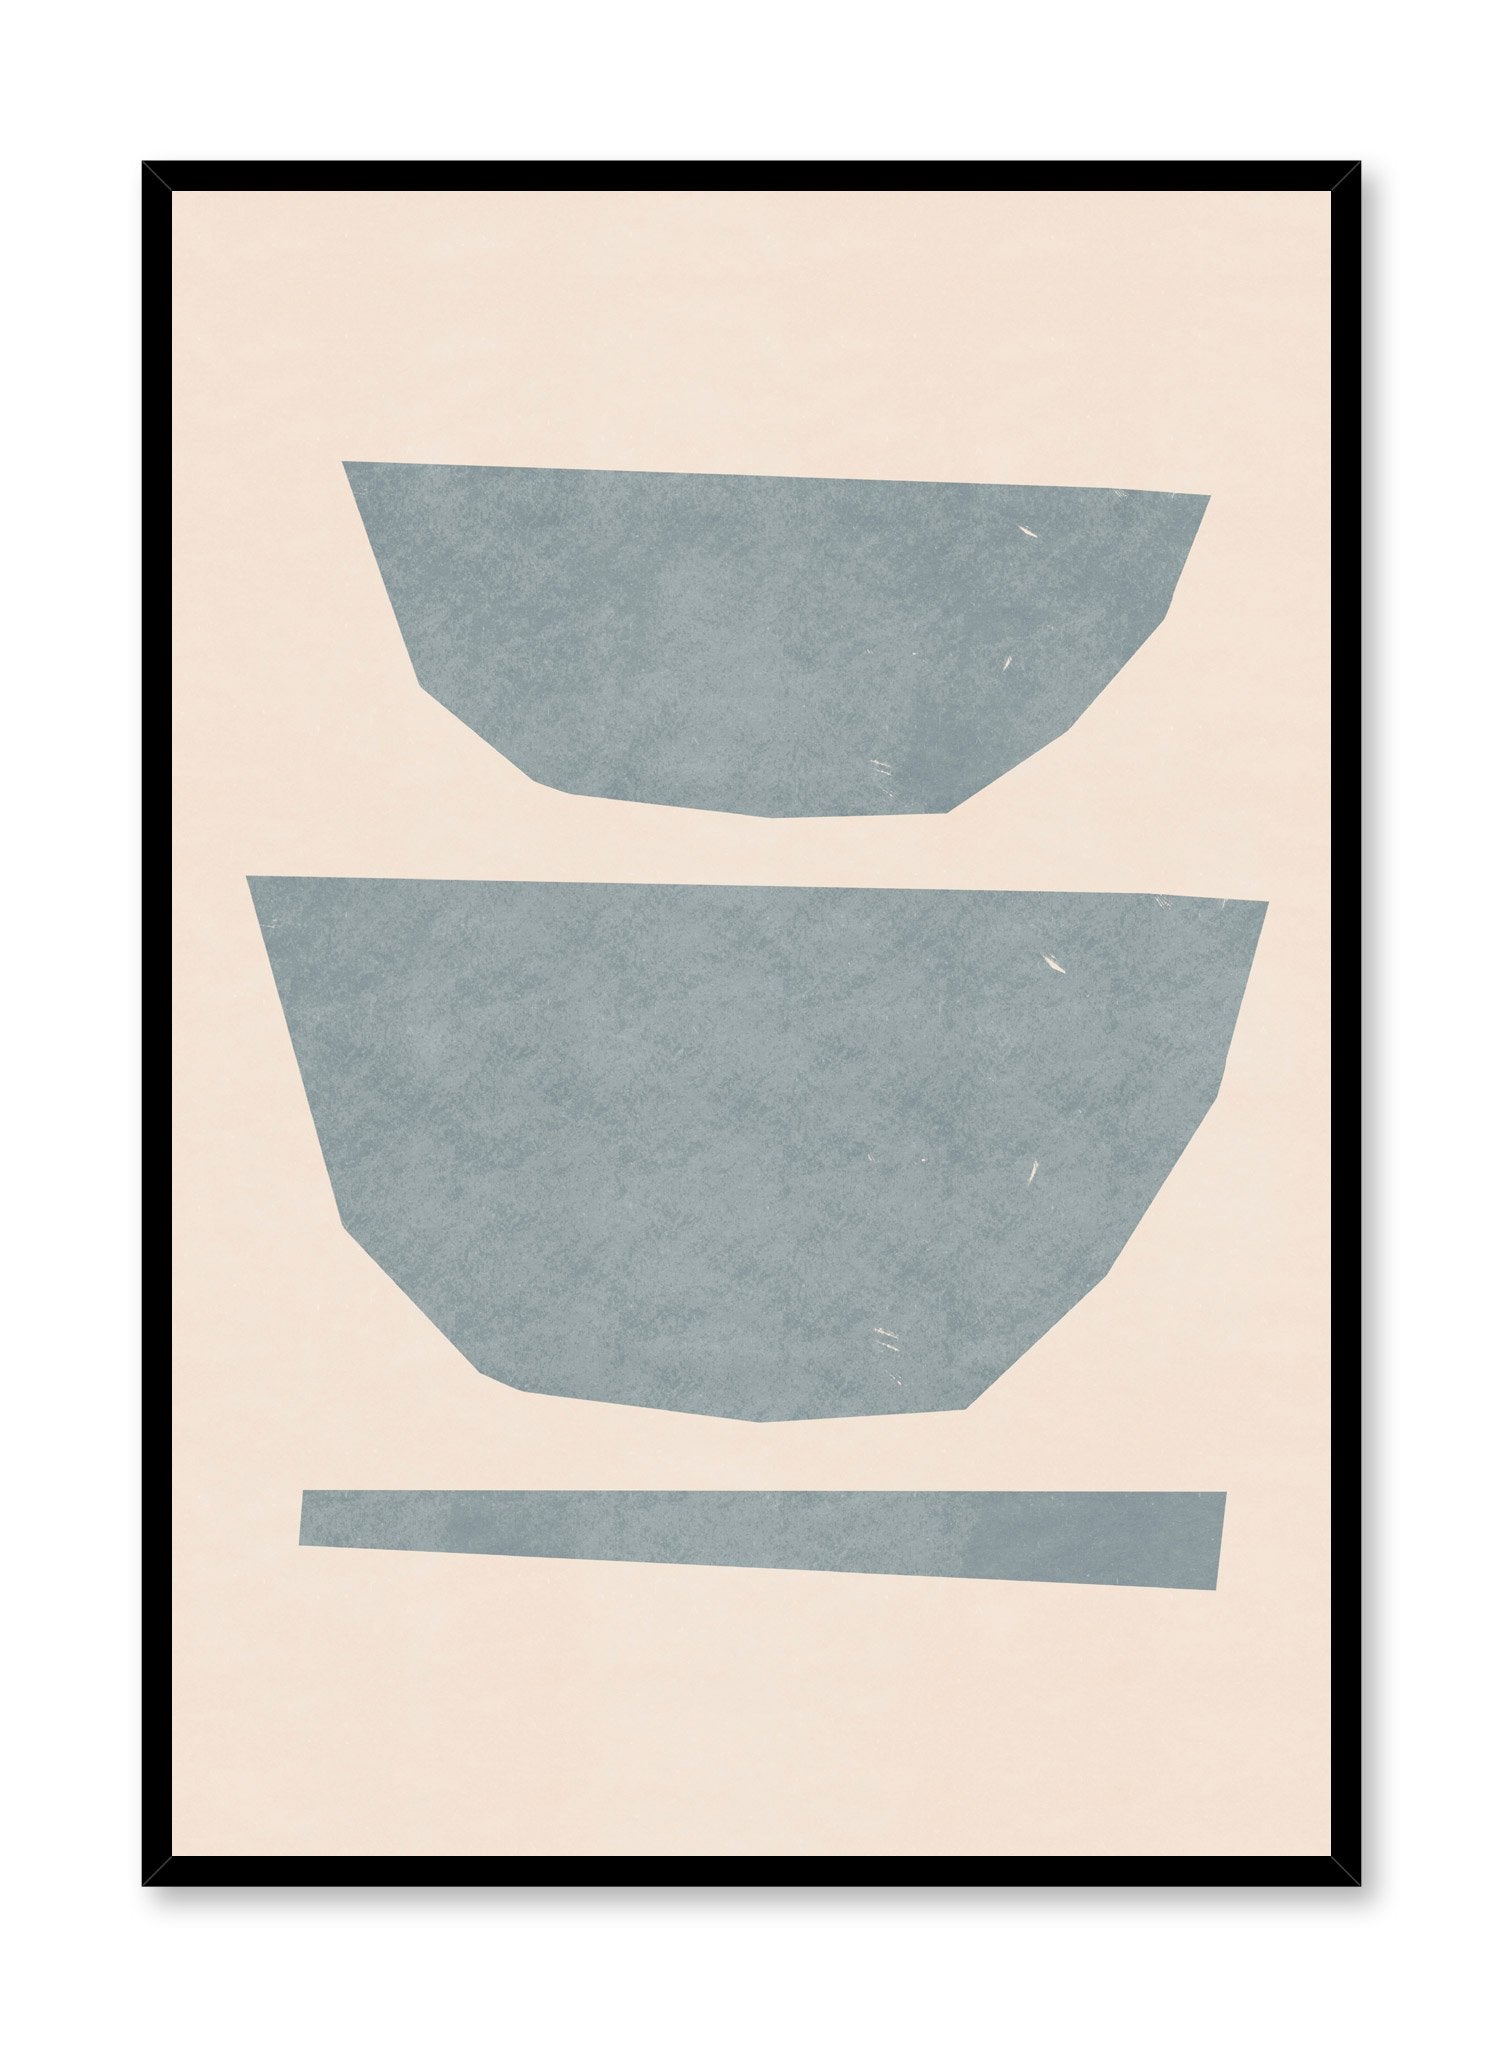 Modern minimalist poster by Opposite Wall with abstract design of Deep Dish by Toffie Affichiste